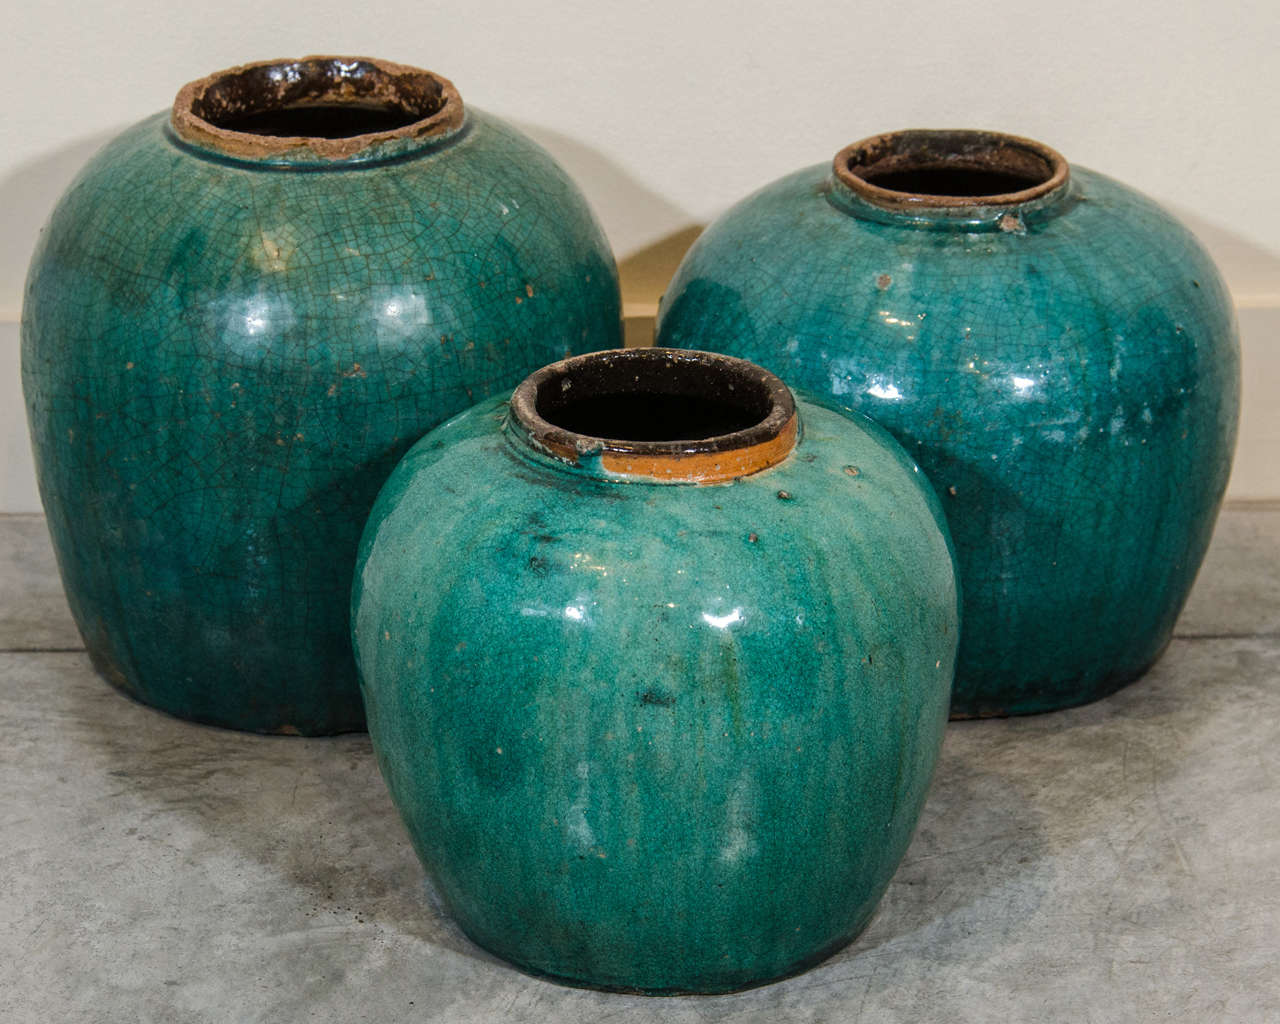 Antique Chinese ceramic ginger jars. From Hunan Province, circa 1880. With varying blue/green glazes. Several available. Sizes vary, contact the shop for details.
CR655